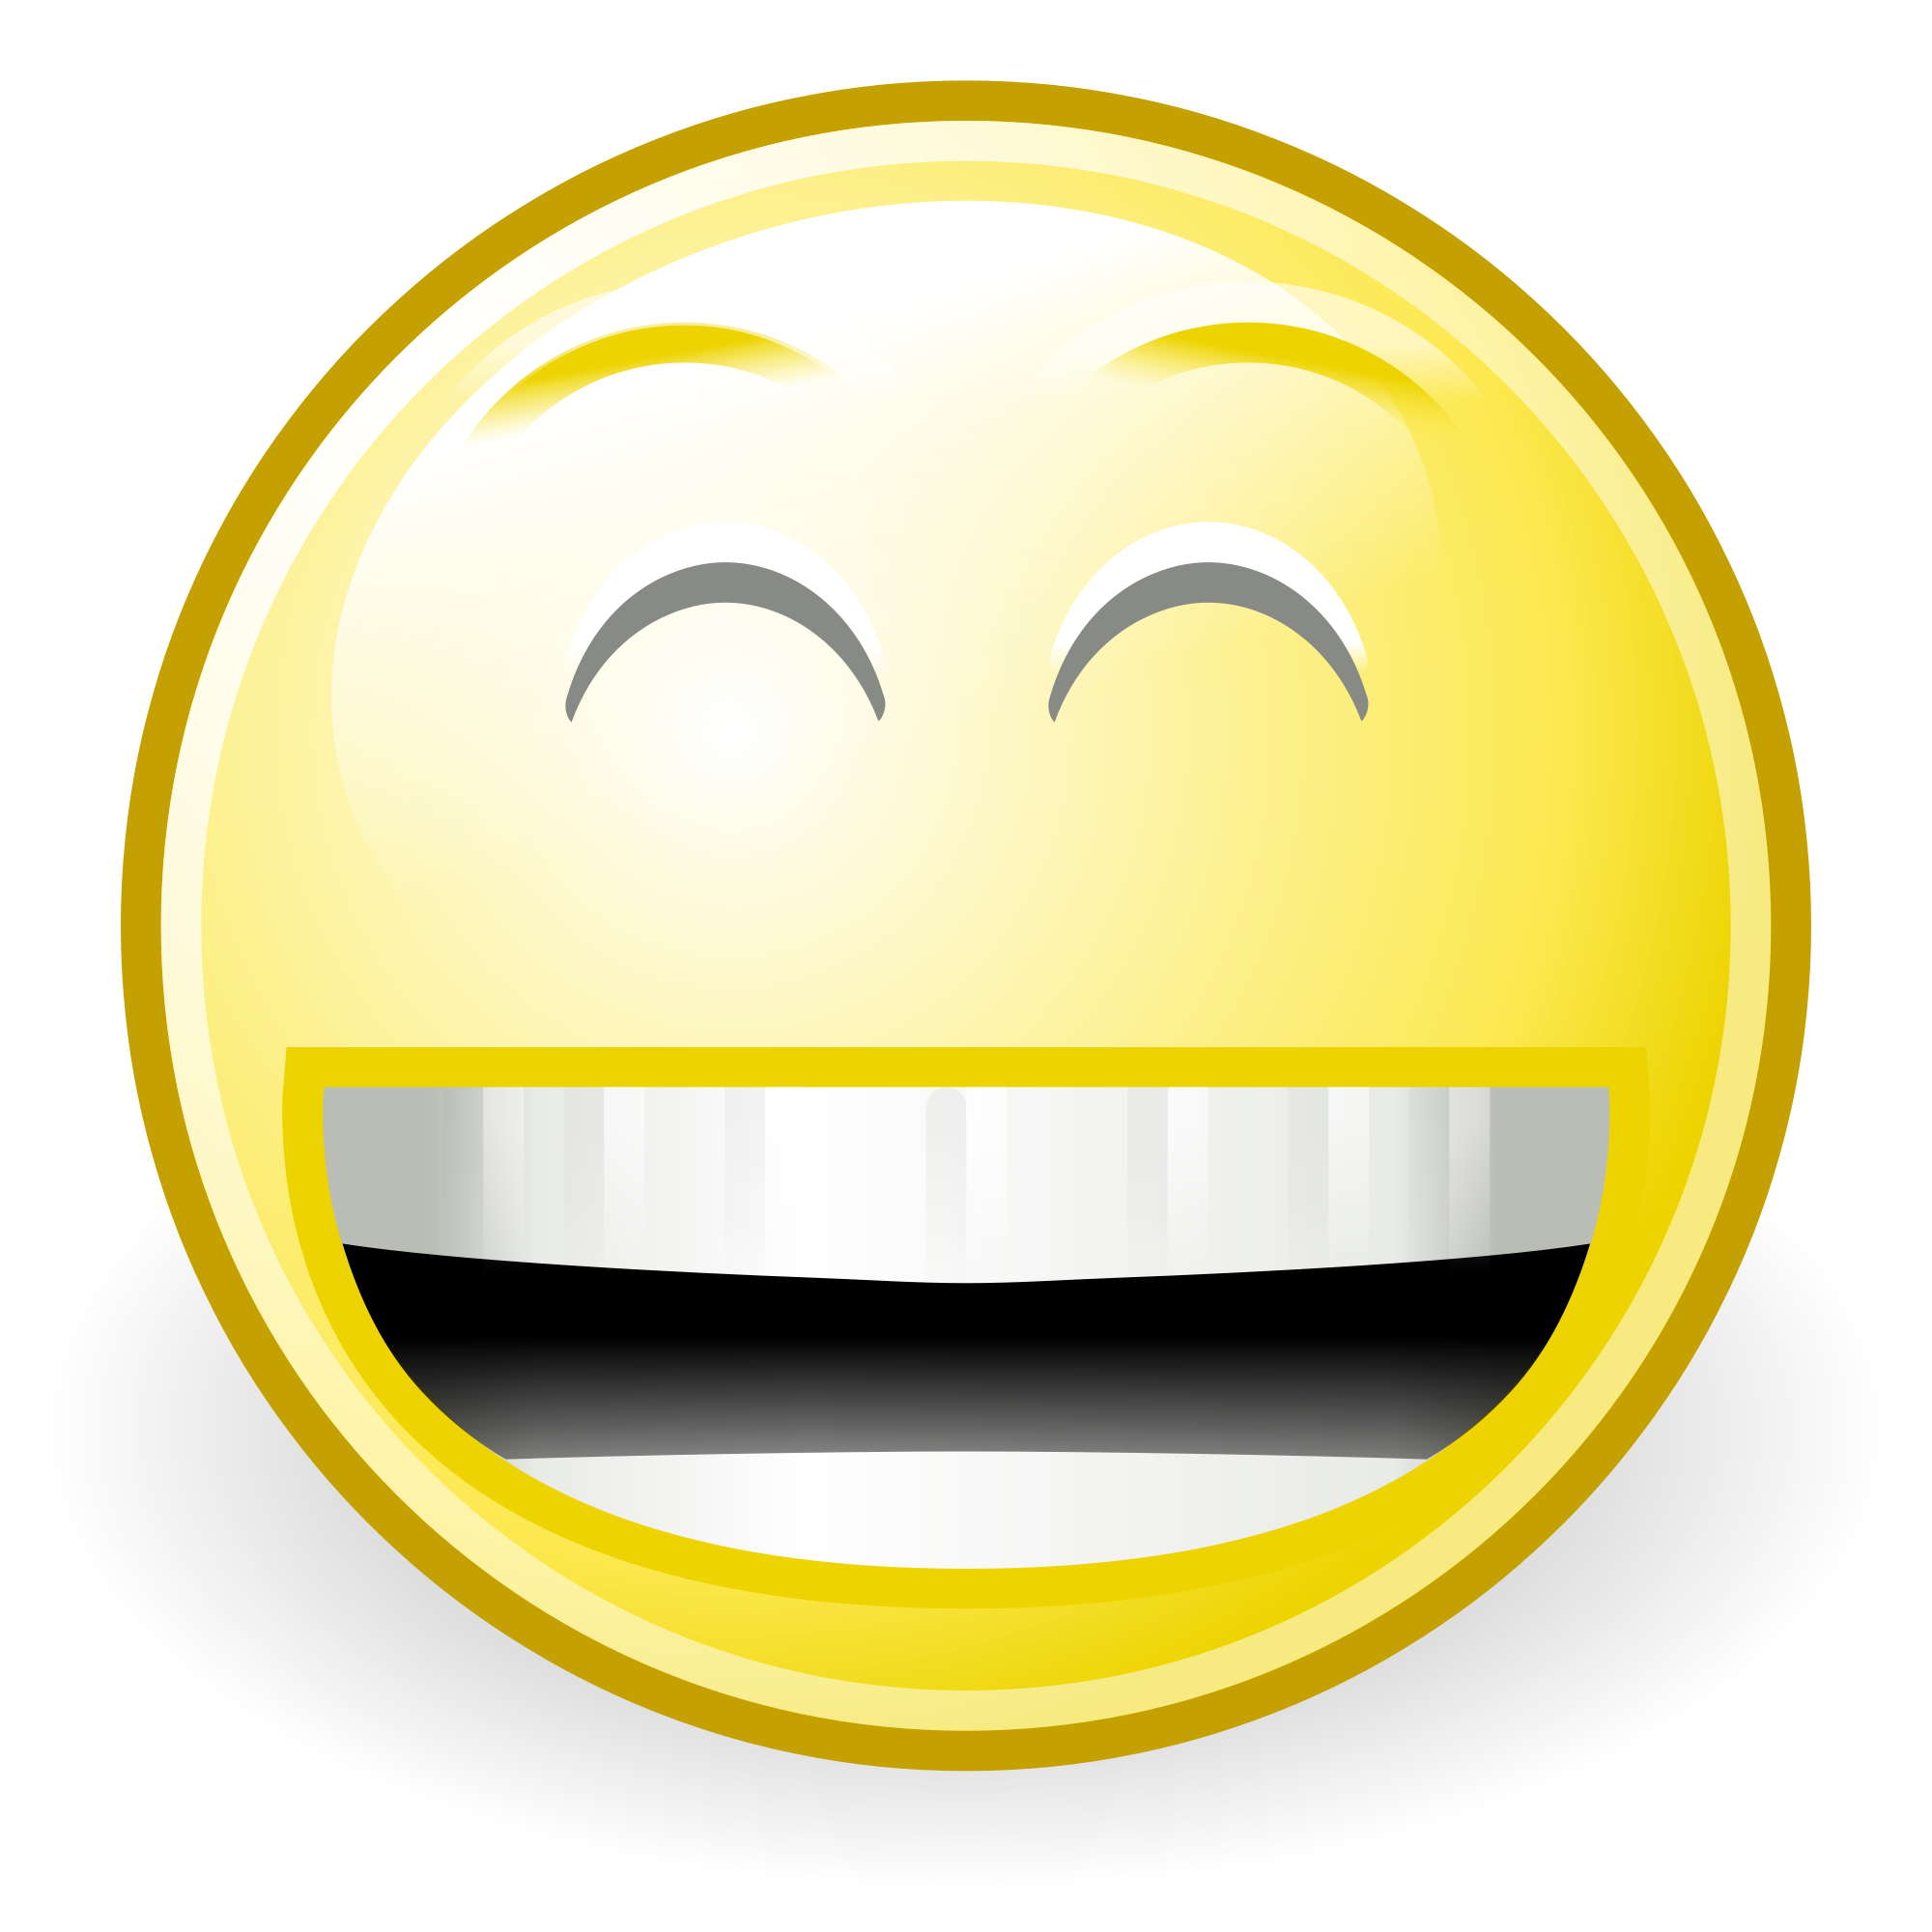 Funny Laughing Face Cartoon - Clipart library - Clipart library